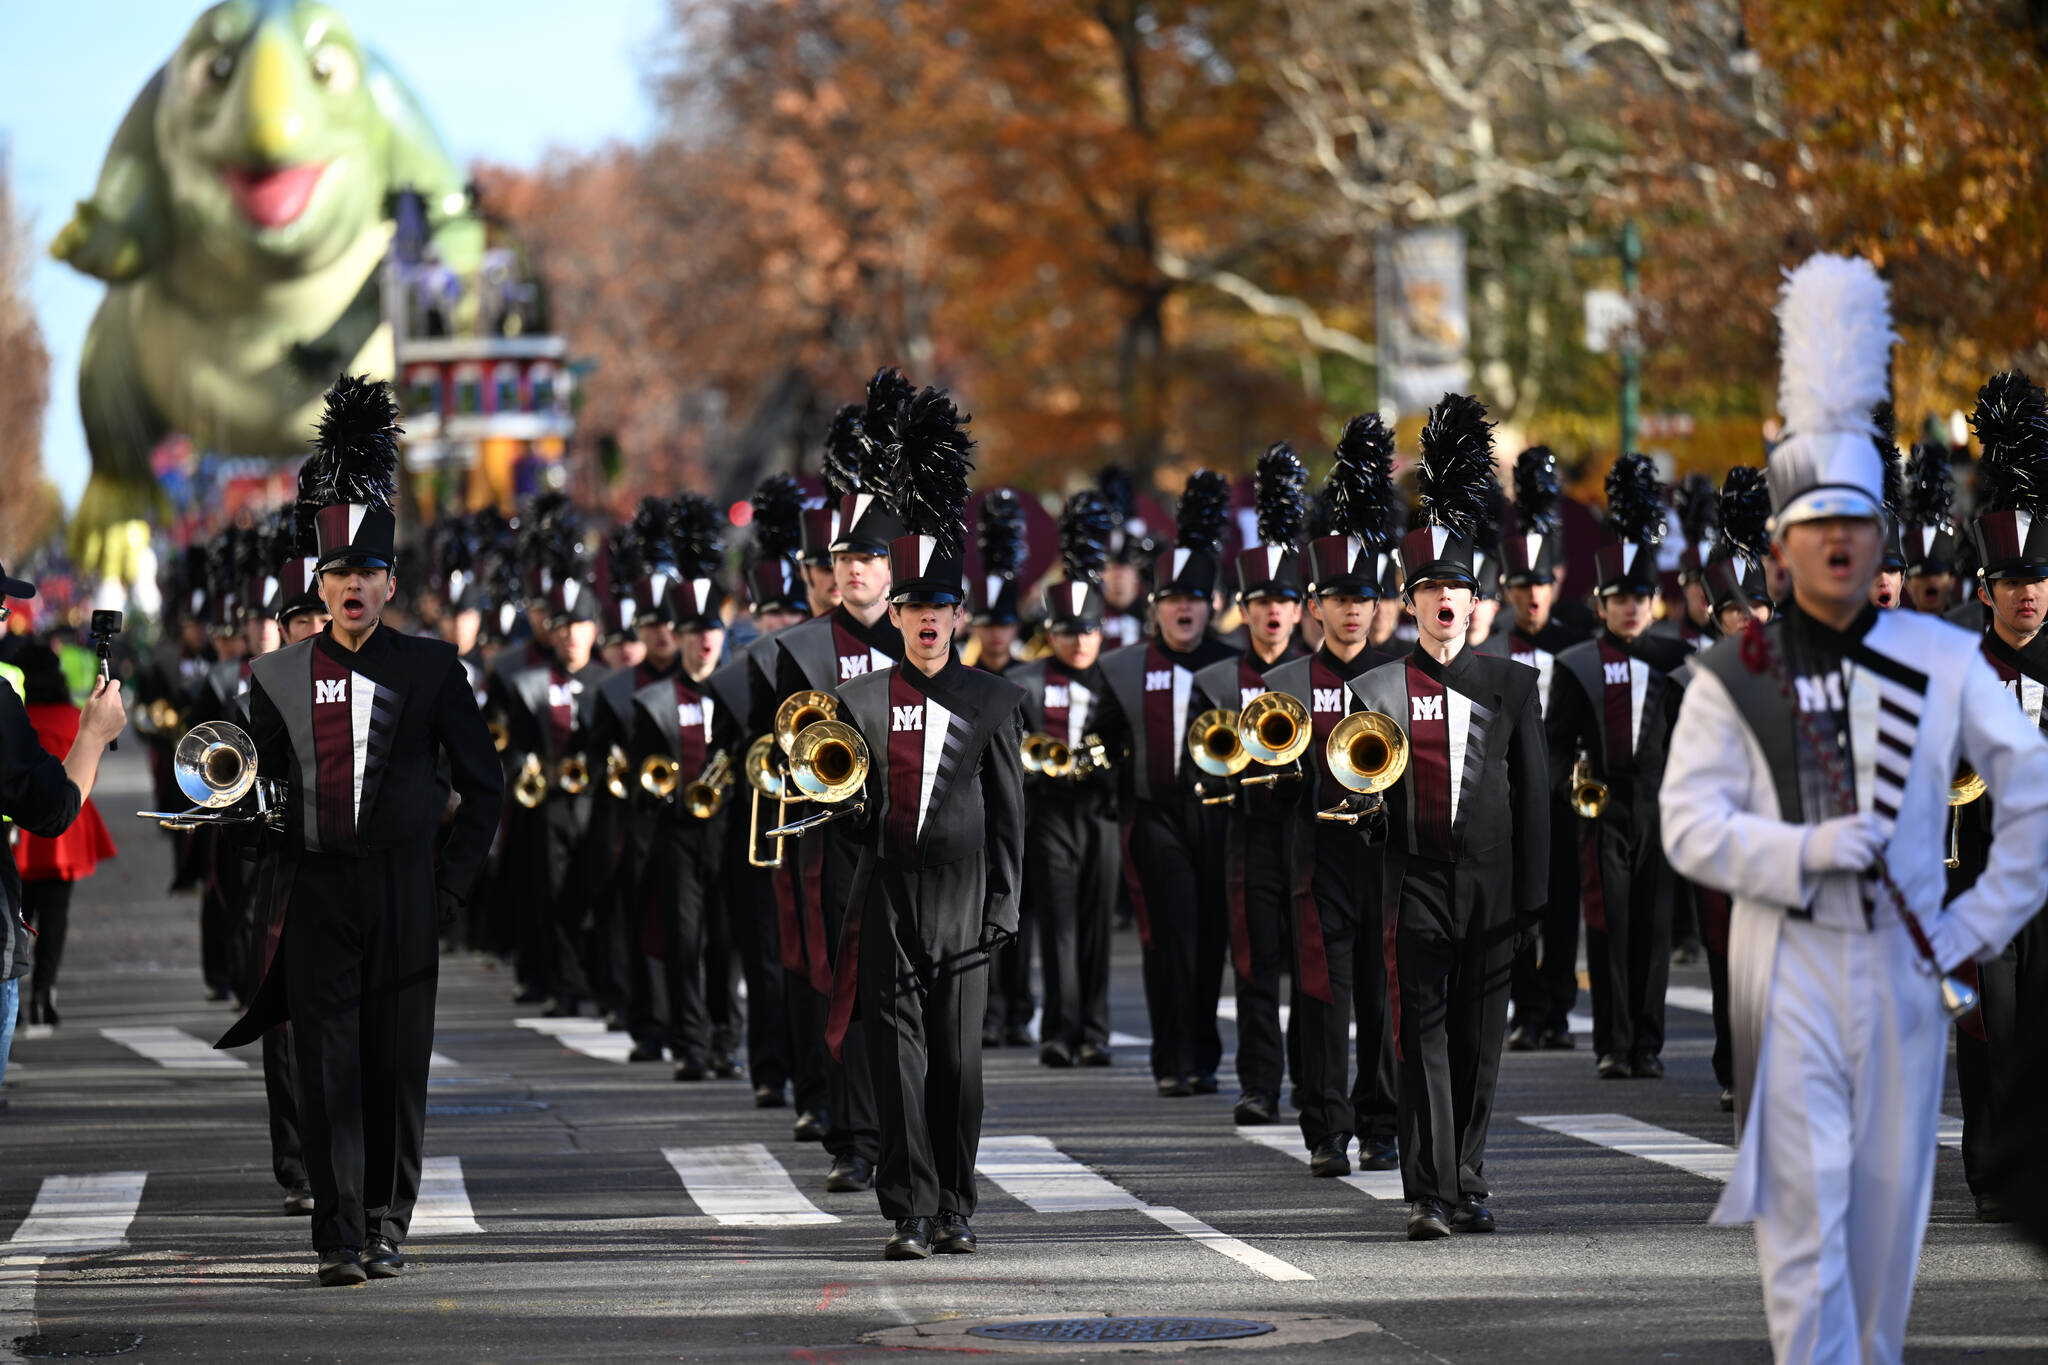 Mercer Island High School’s marching band hit the big time in the Big Apple by performing in the 97th Macy’s Thanksgiving Day Parade in New York City. The band also appeared on the Today Show on NBC to highlight its performance in the immense event. Photo courtesy of James Jantos